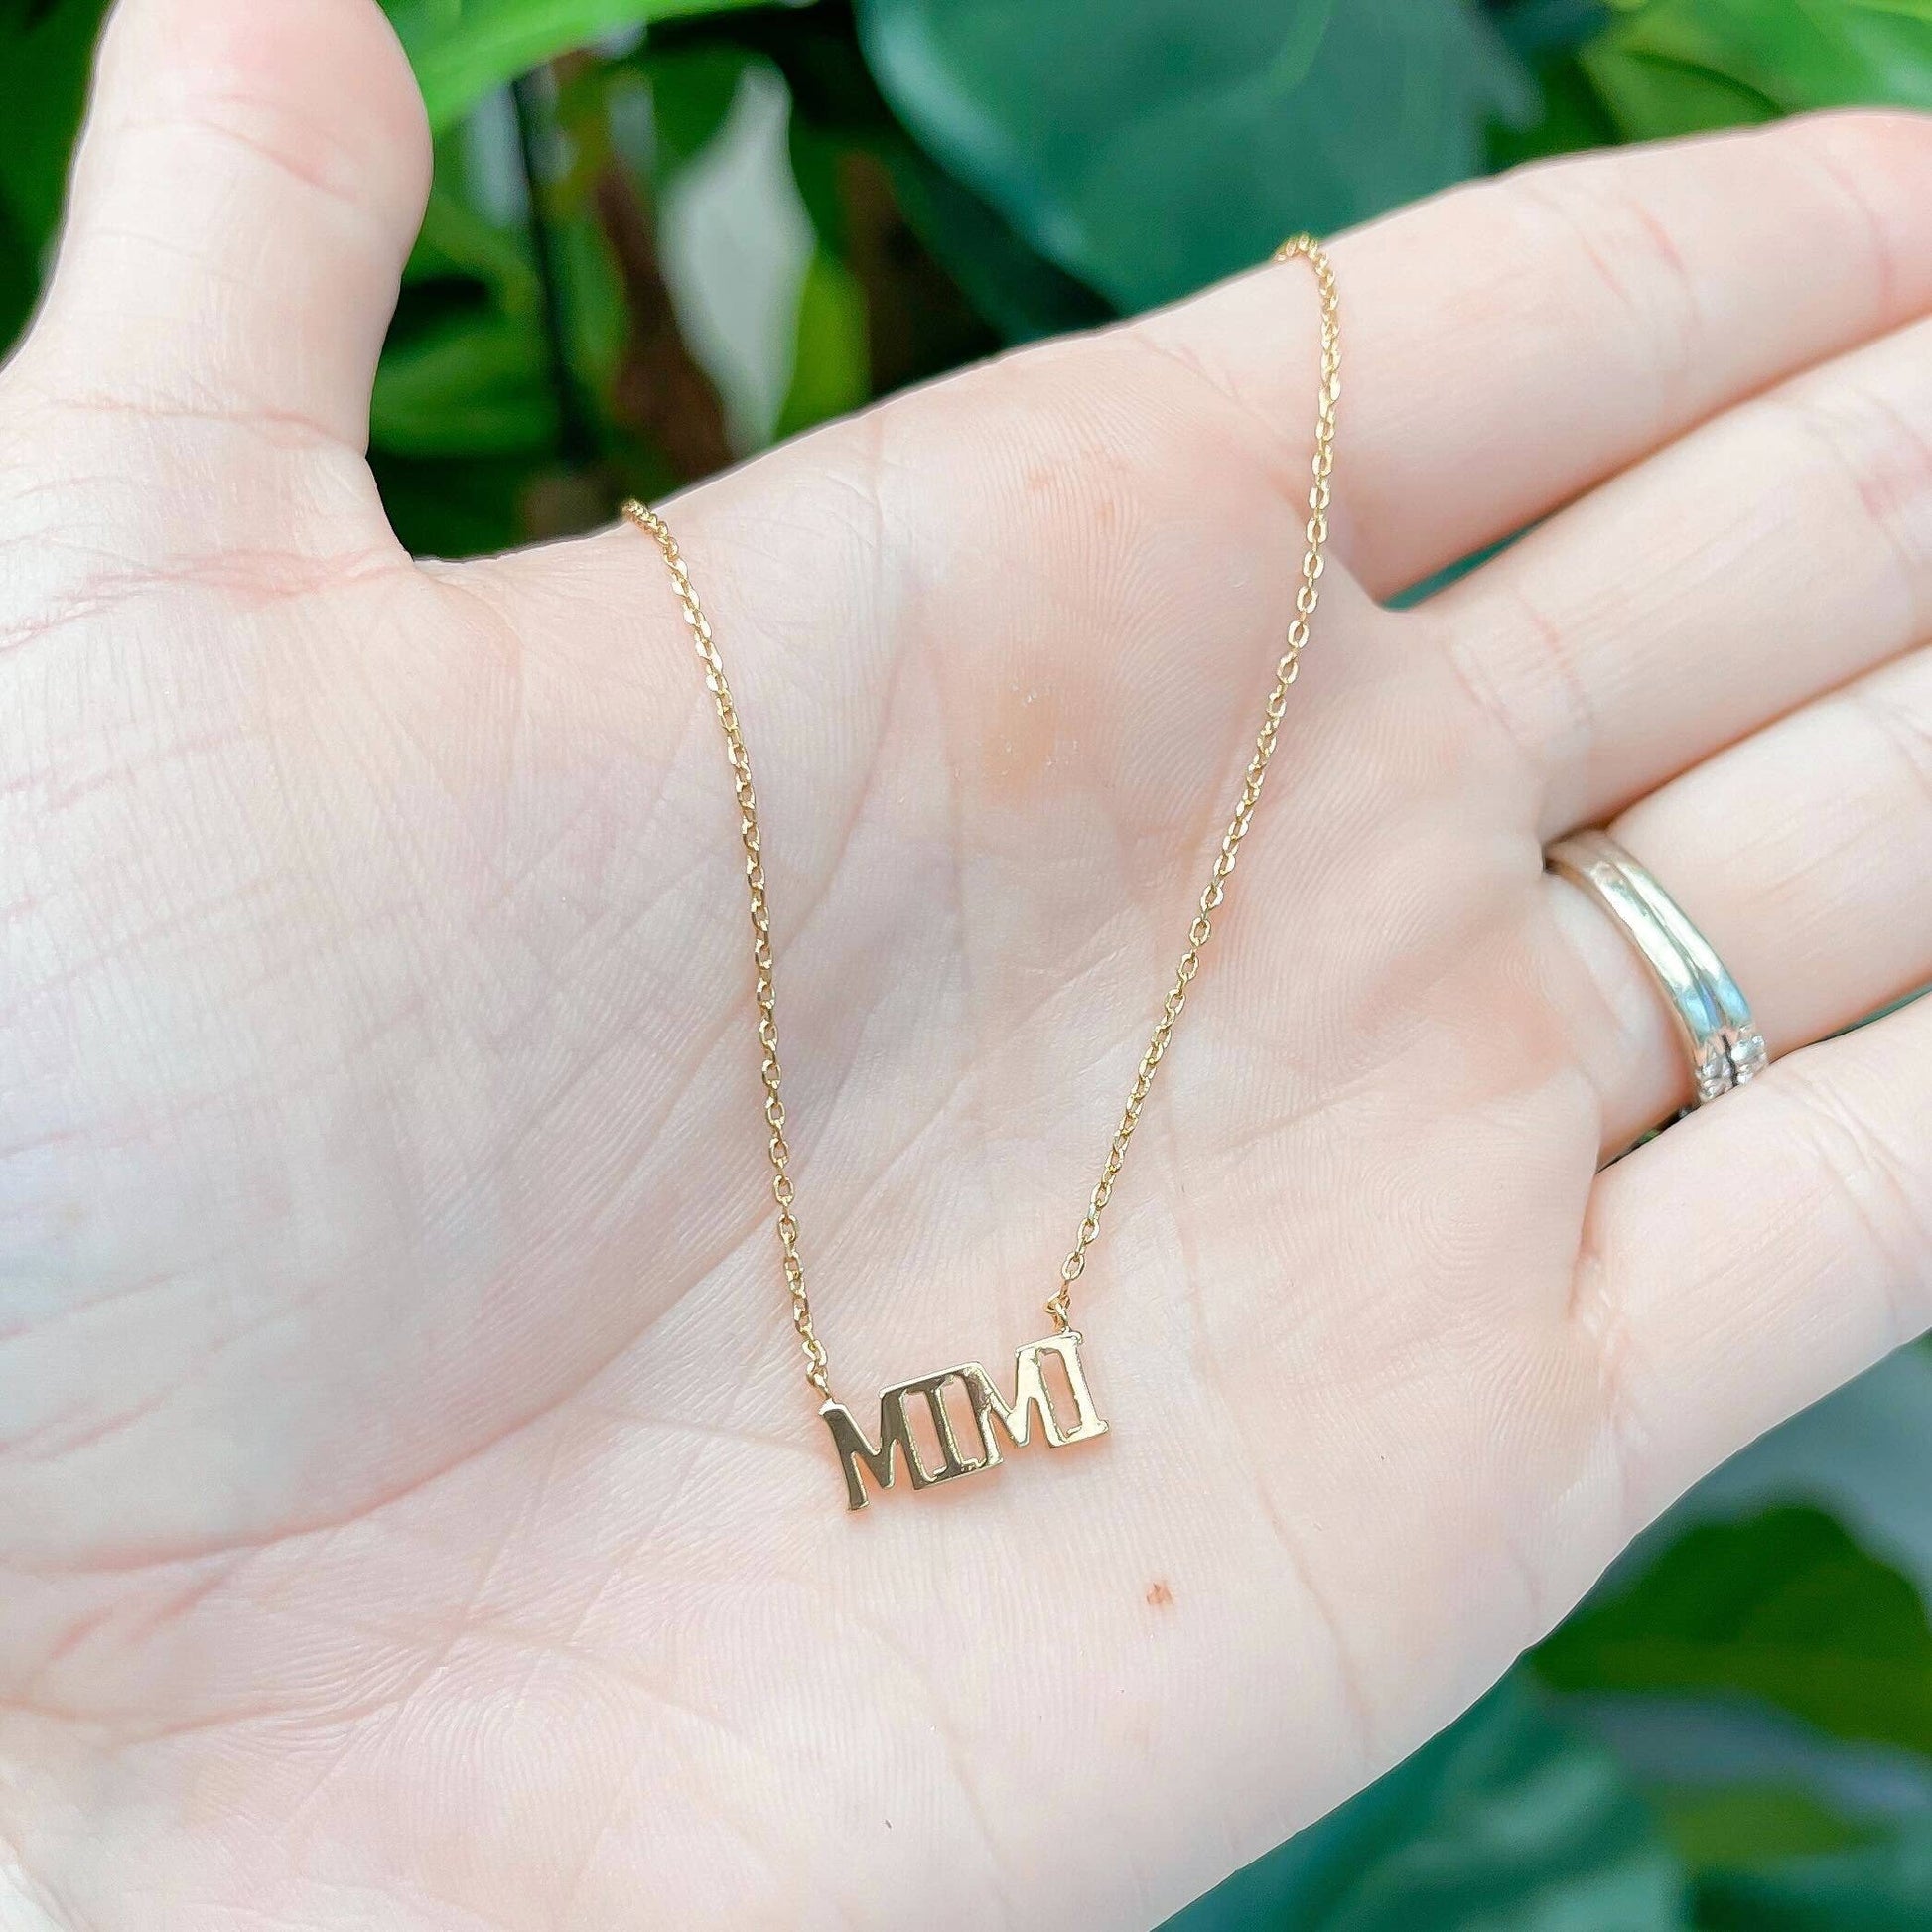 'MIMI' Gold Pendant Necklace - The Salty Mare